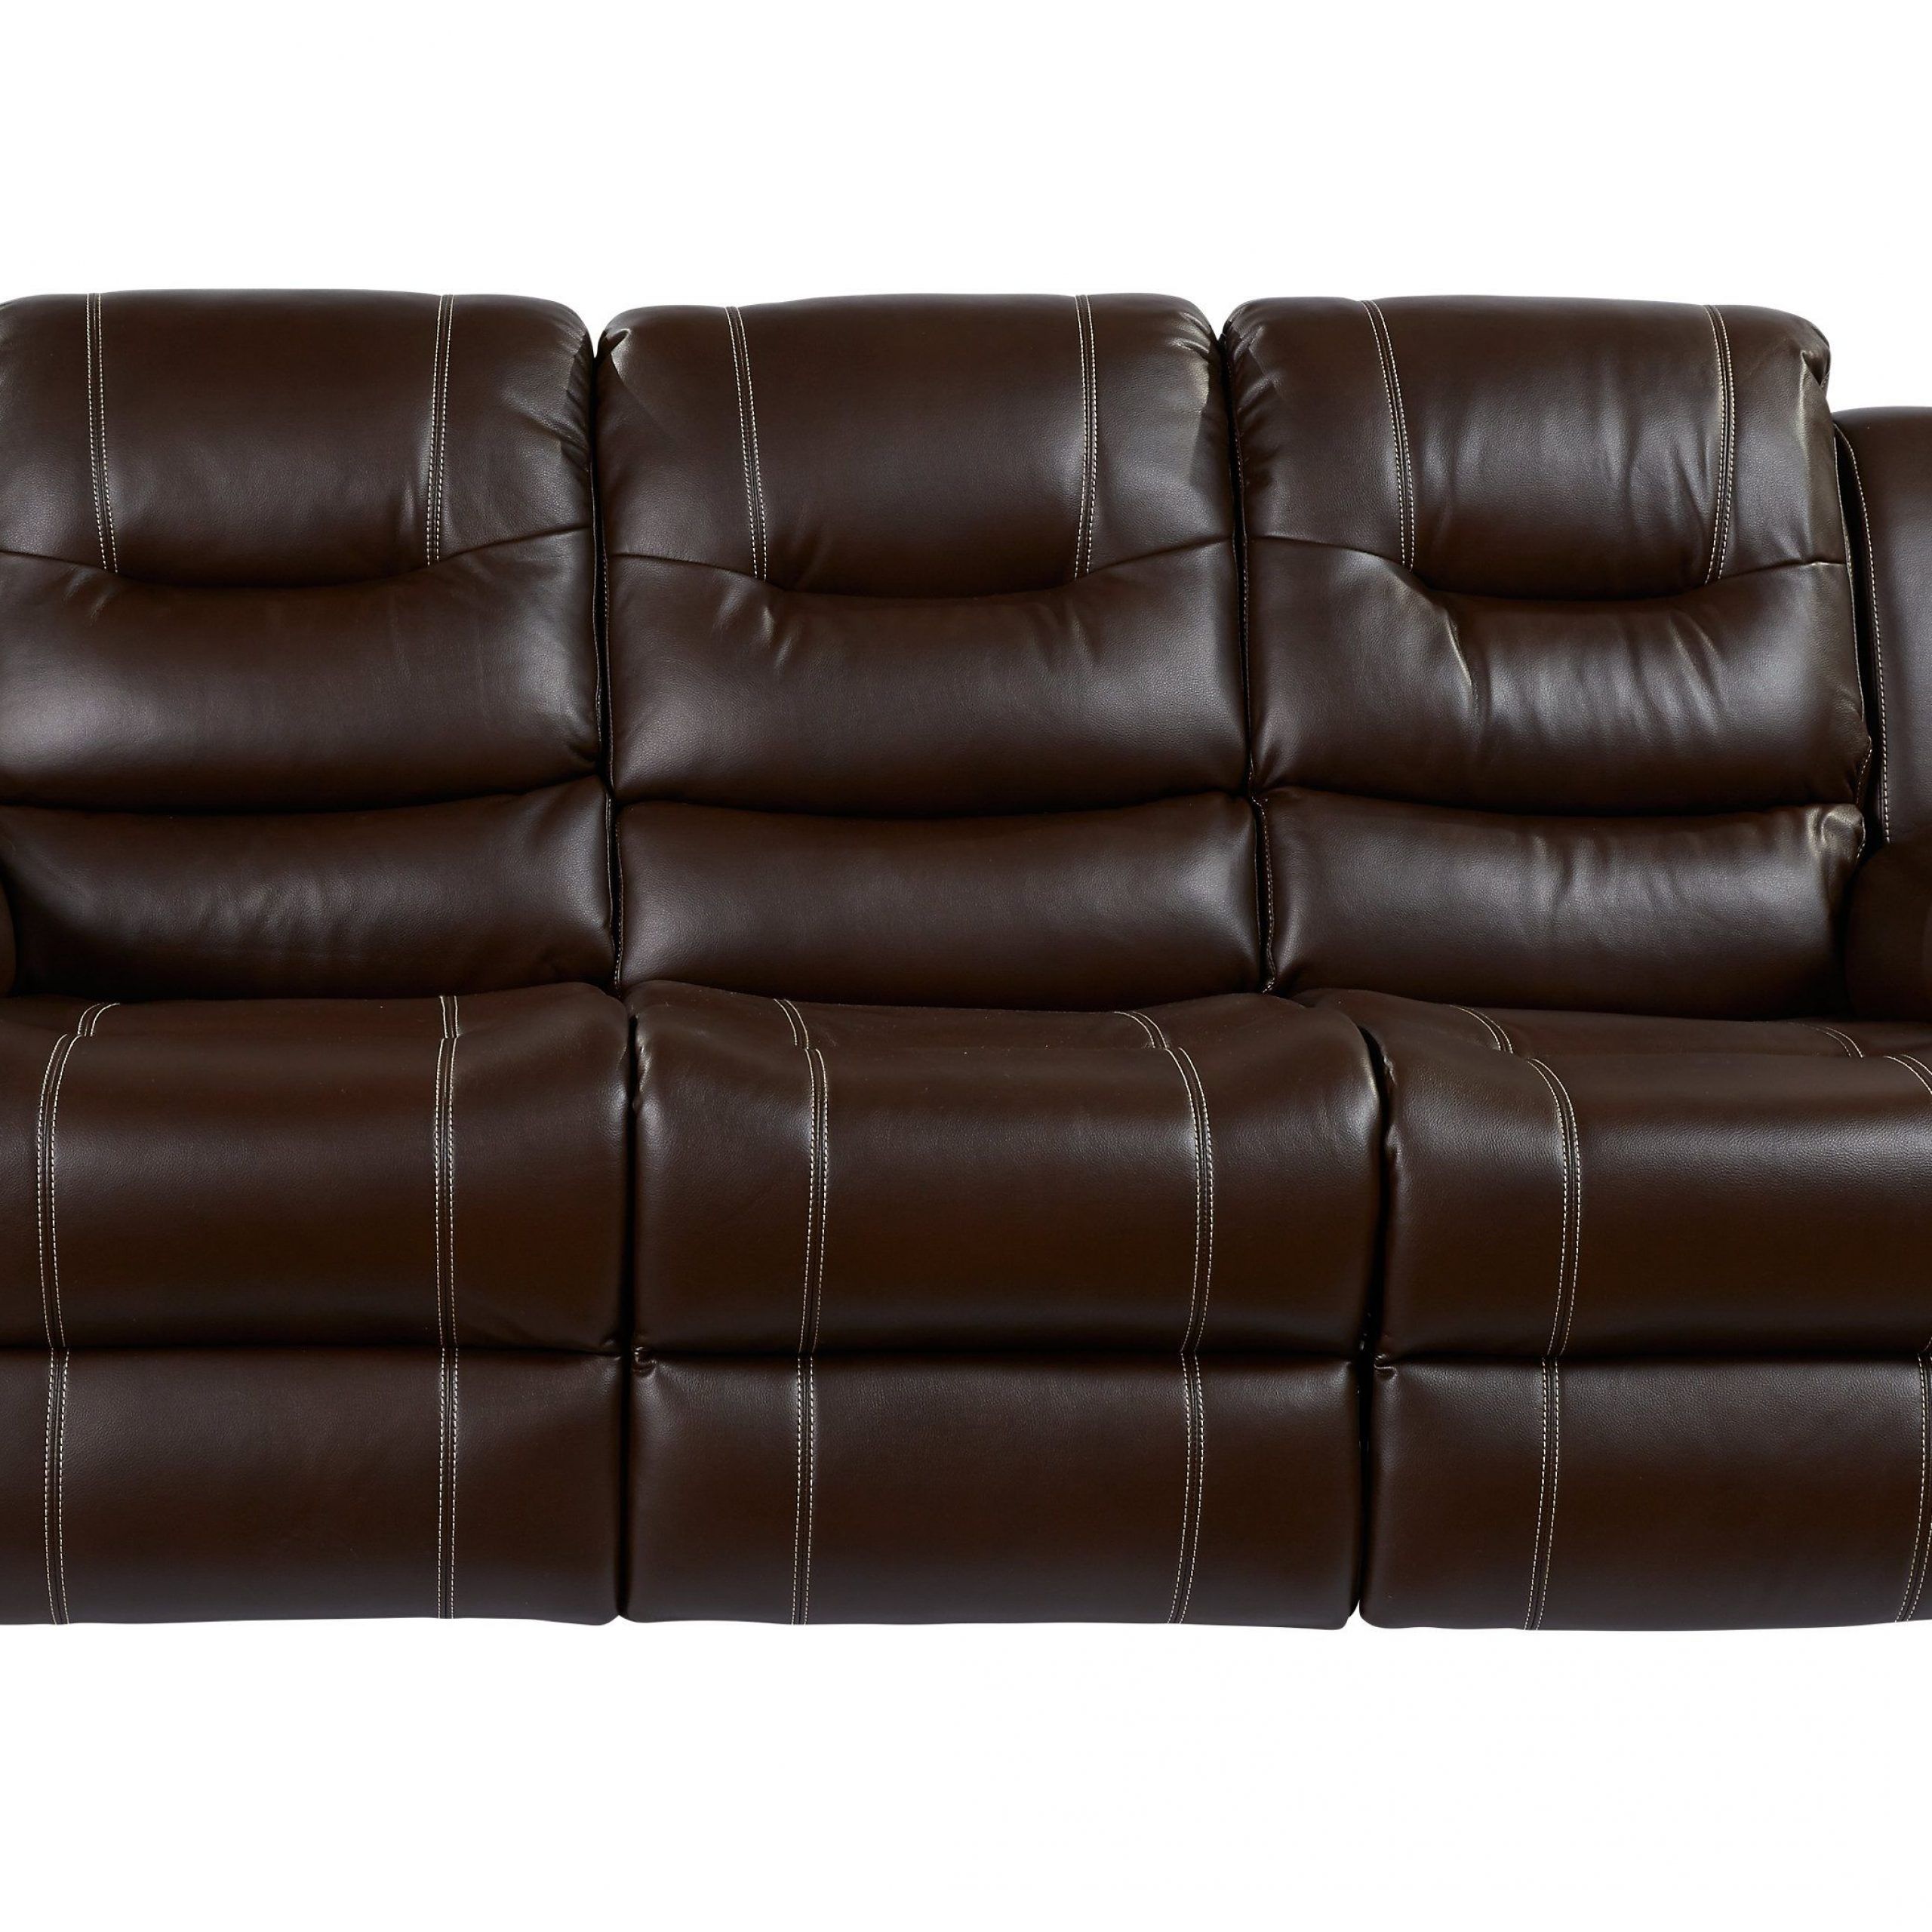 Brown Leather Sofa Living Room, Reclining Sofa, Affordable Pertaining To Marco Leather Power Reclining Sofas (View 13 of 15)